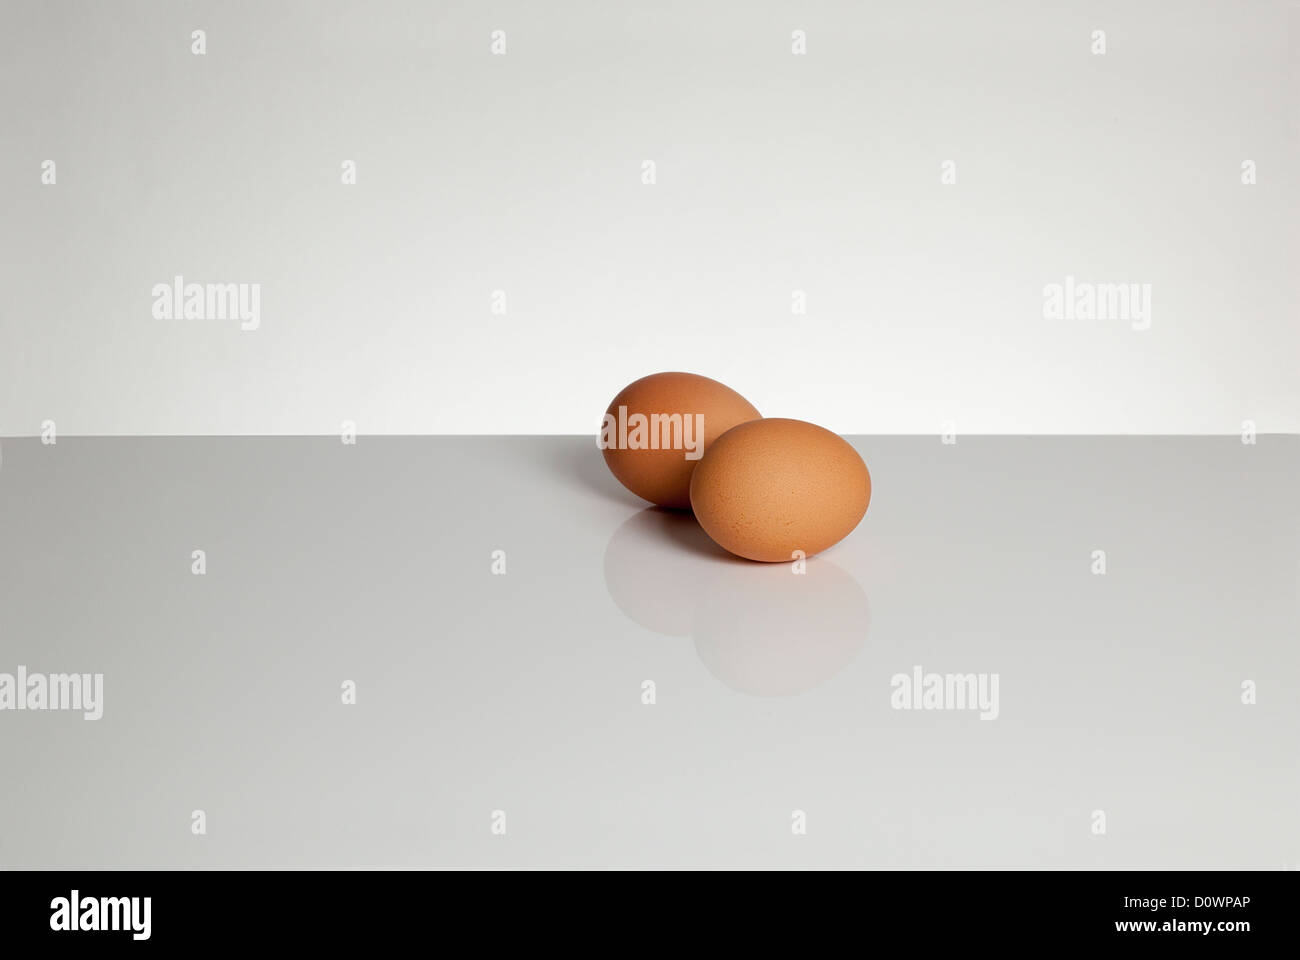 Two eggs on a grey surface. Space for type around. Landscape shape. Stock Photo